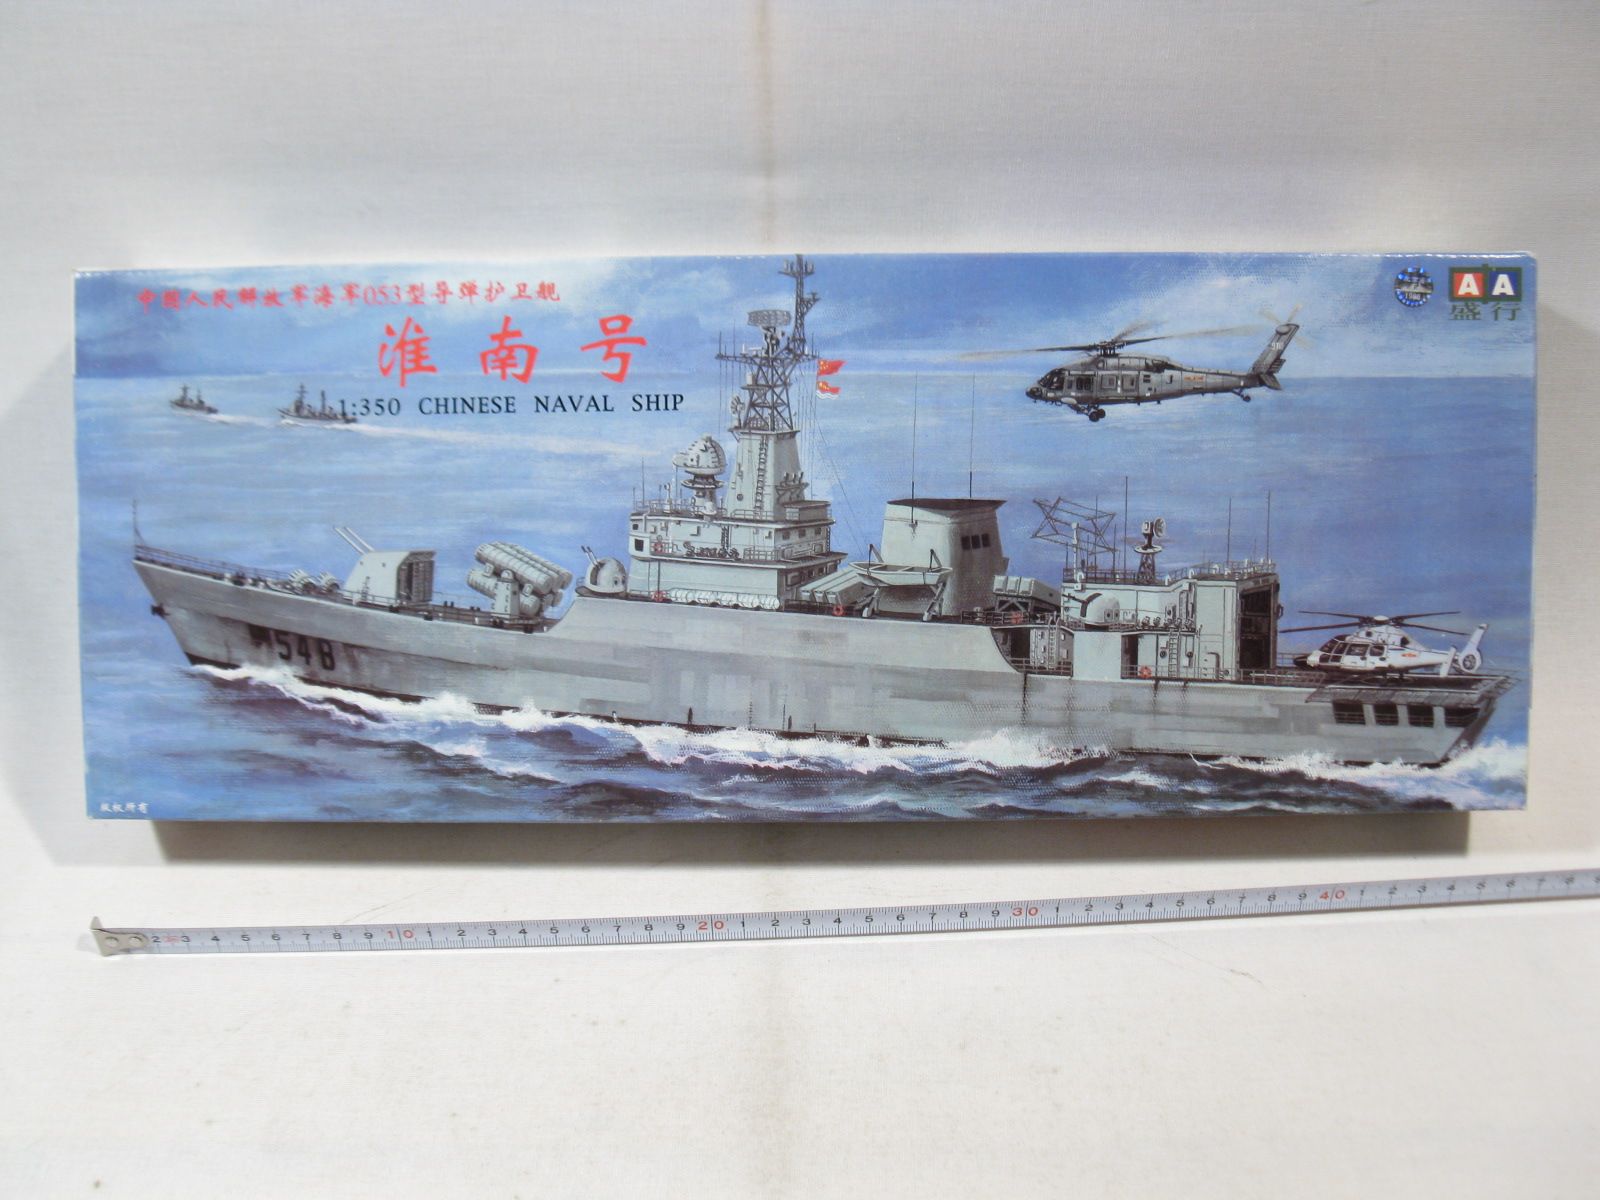 AA 4512  Chinese Naval Ship 548  mit Motor  1:350   lose in box mb4989